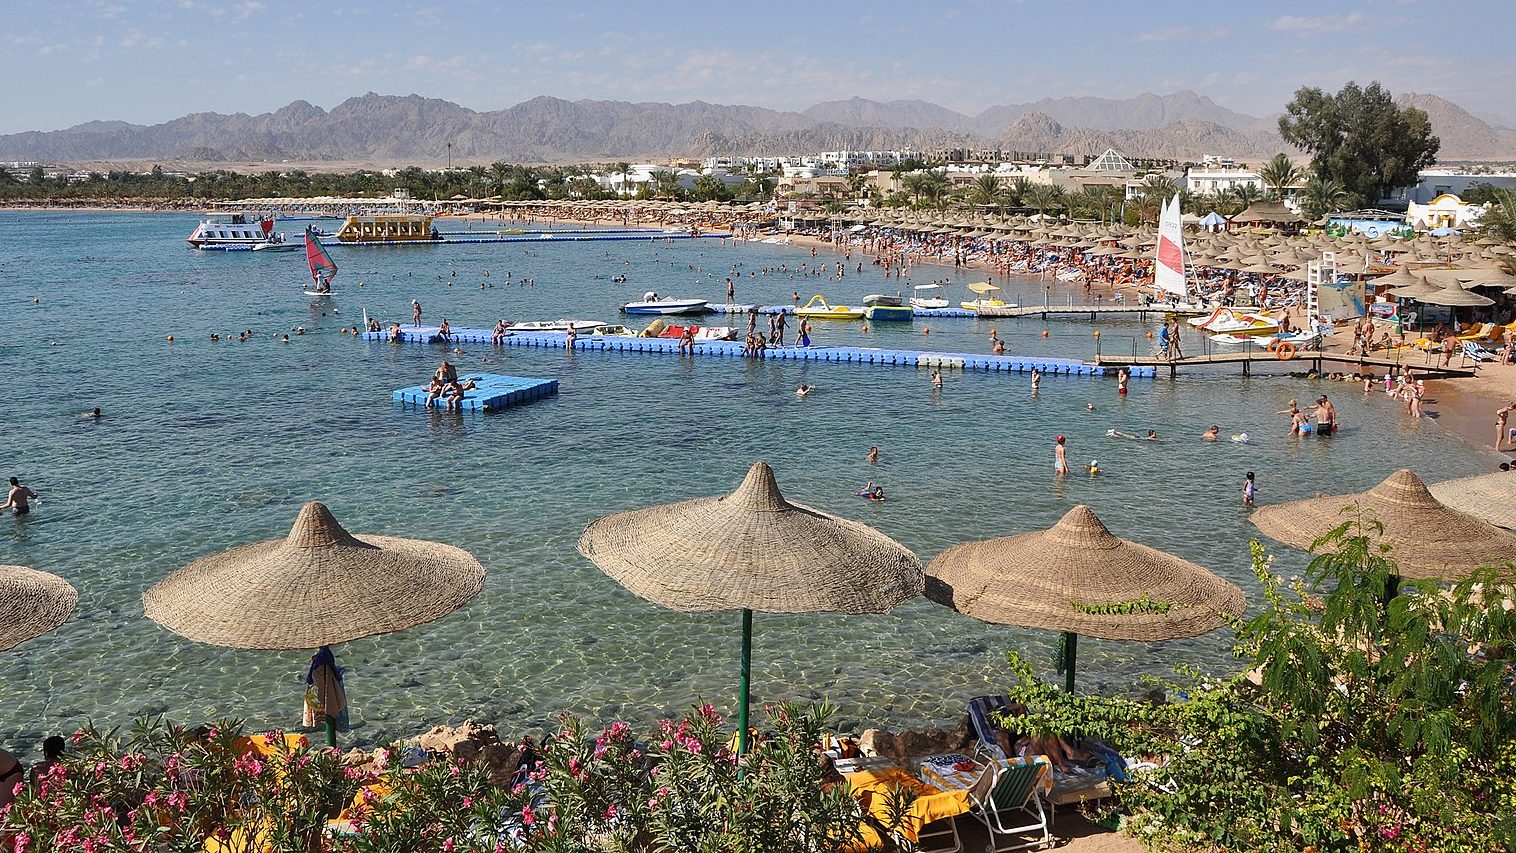 Moscow Resumes Flights To Red Sea Resorts After 6-Year Ban